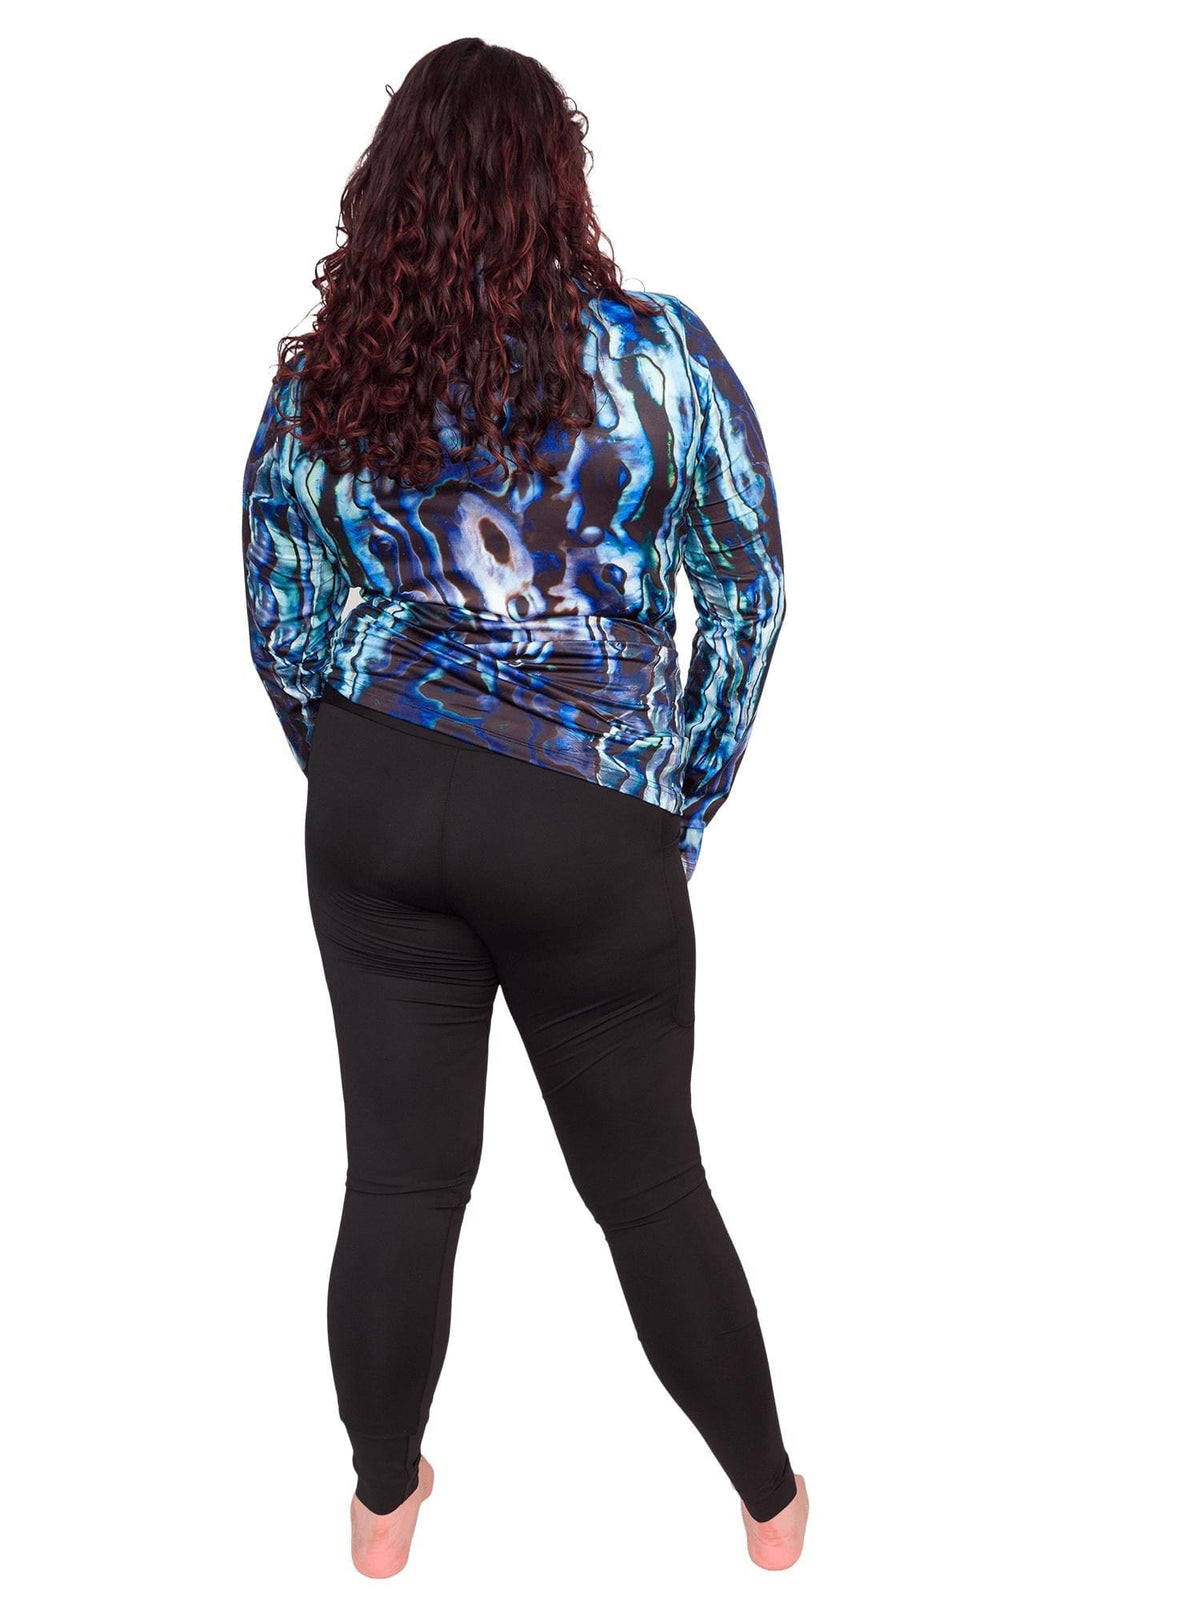 Model: Kela is a marine conservationist who strives to connect students with educational opportunities to help expand the reach of the marine science field. She is 5’5”, 185 lbs, 36F and is wearing a size XL sun shirt and legging.